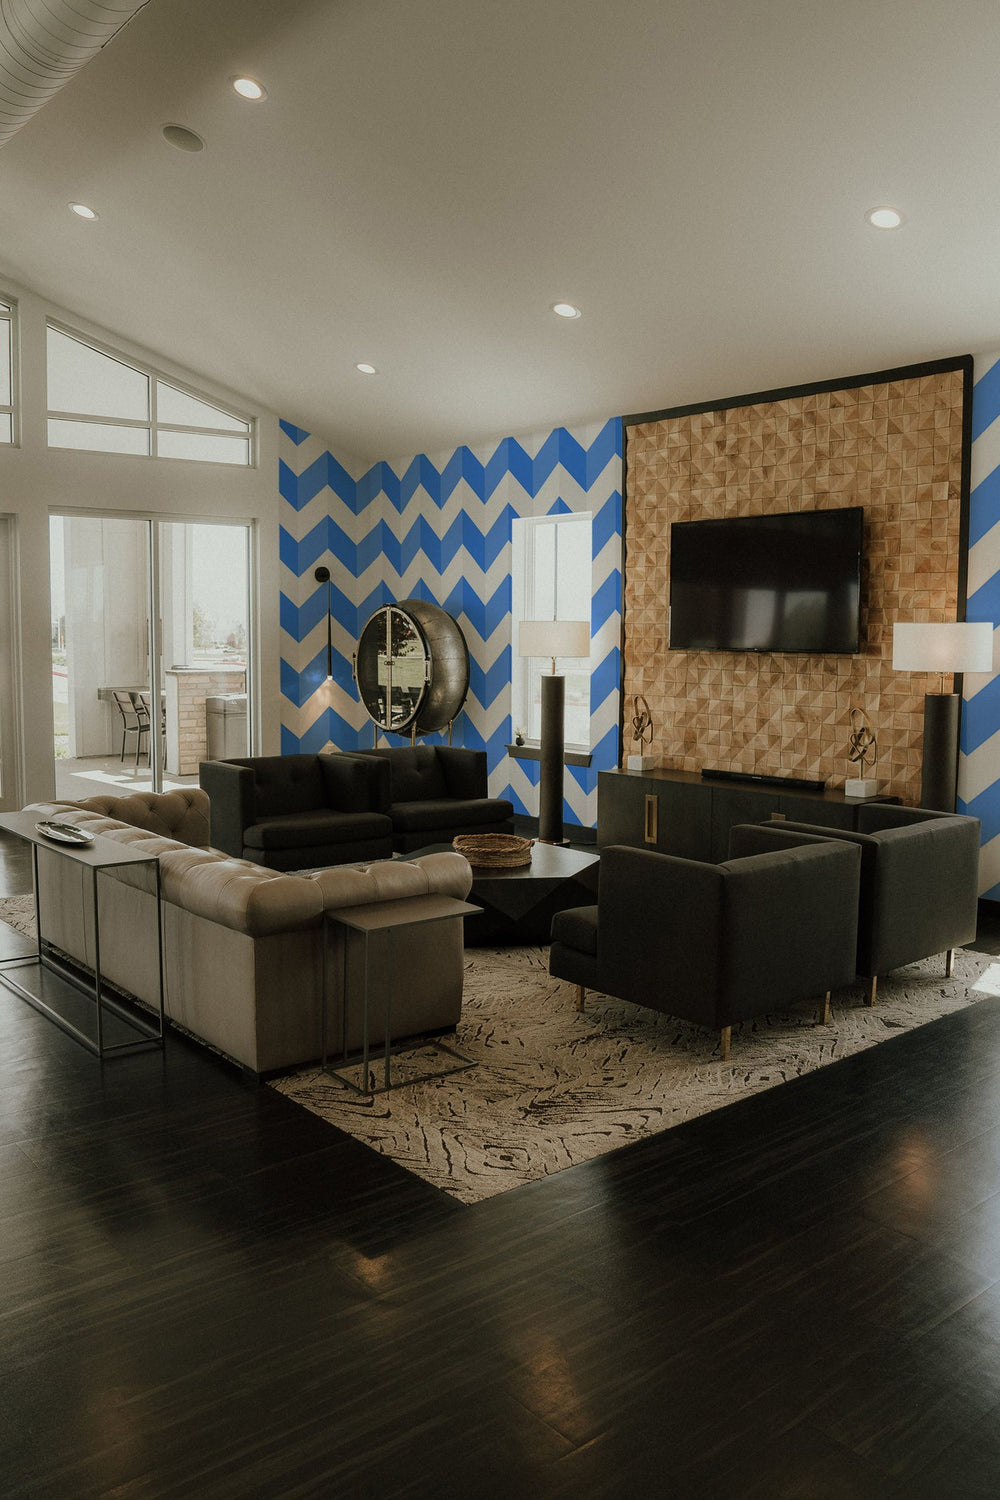 Stylish living room interior with a chevron pattern wall mural, comfortable seating and elegant decor.